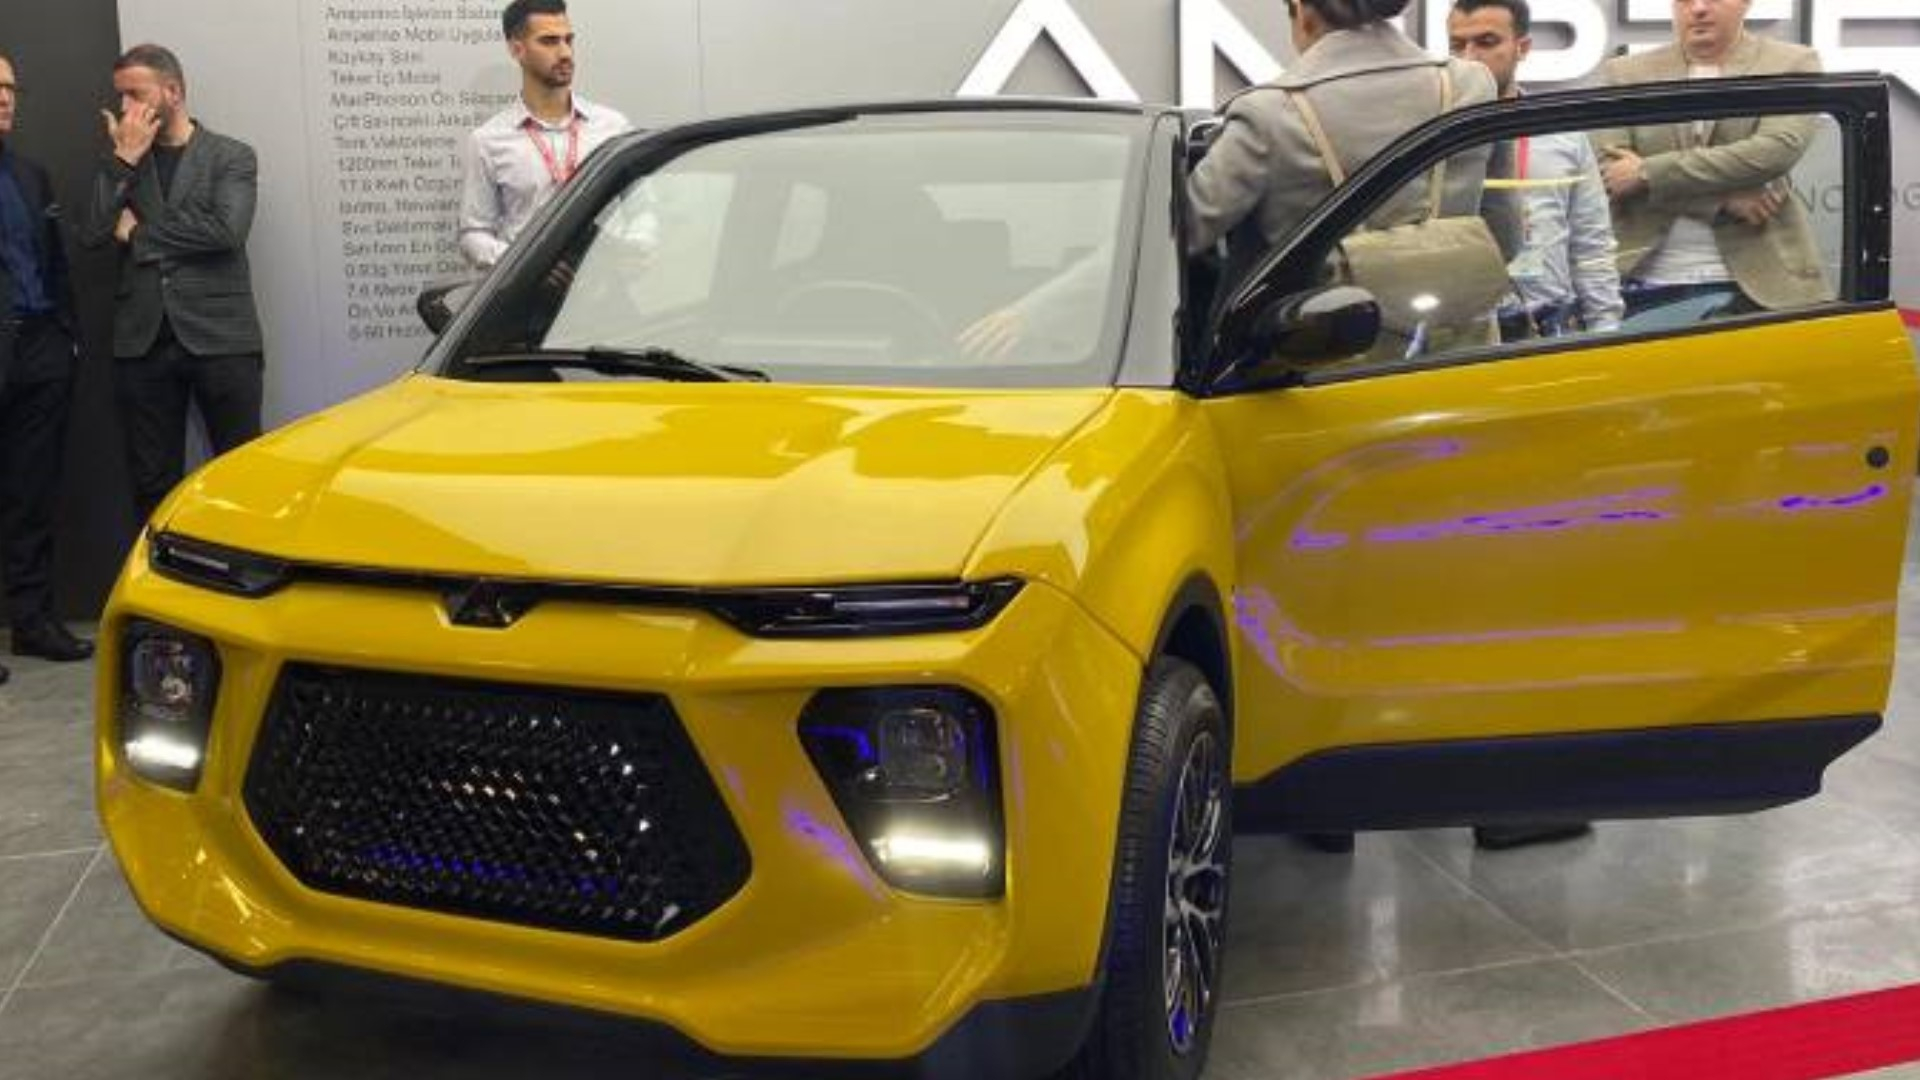 Turkey's second fully electric car Amperino C100 was introduced 